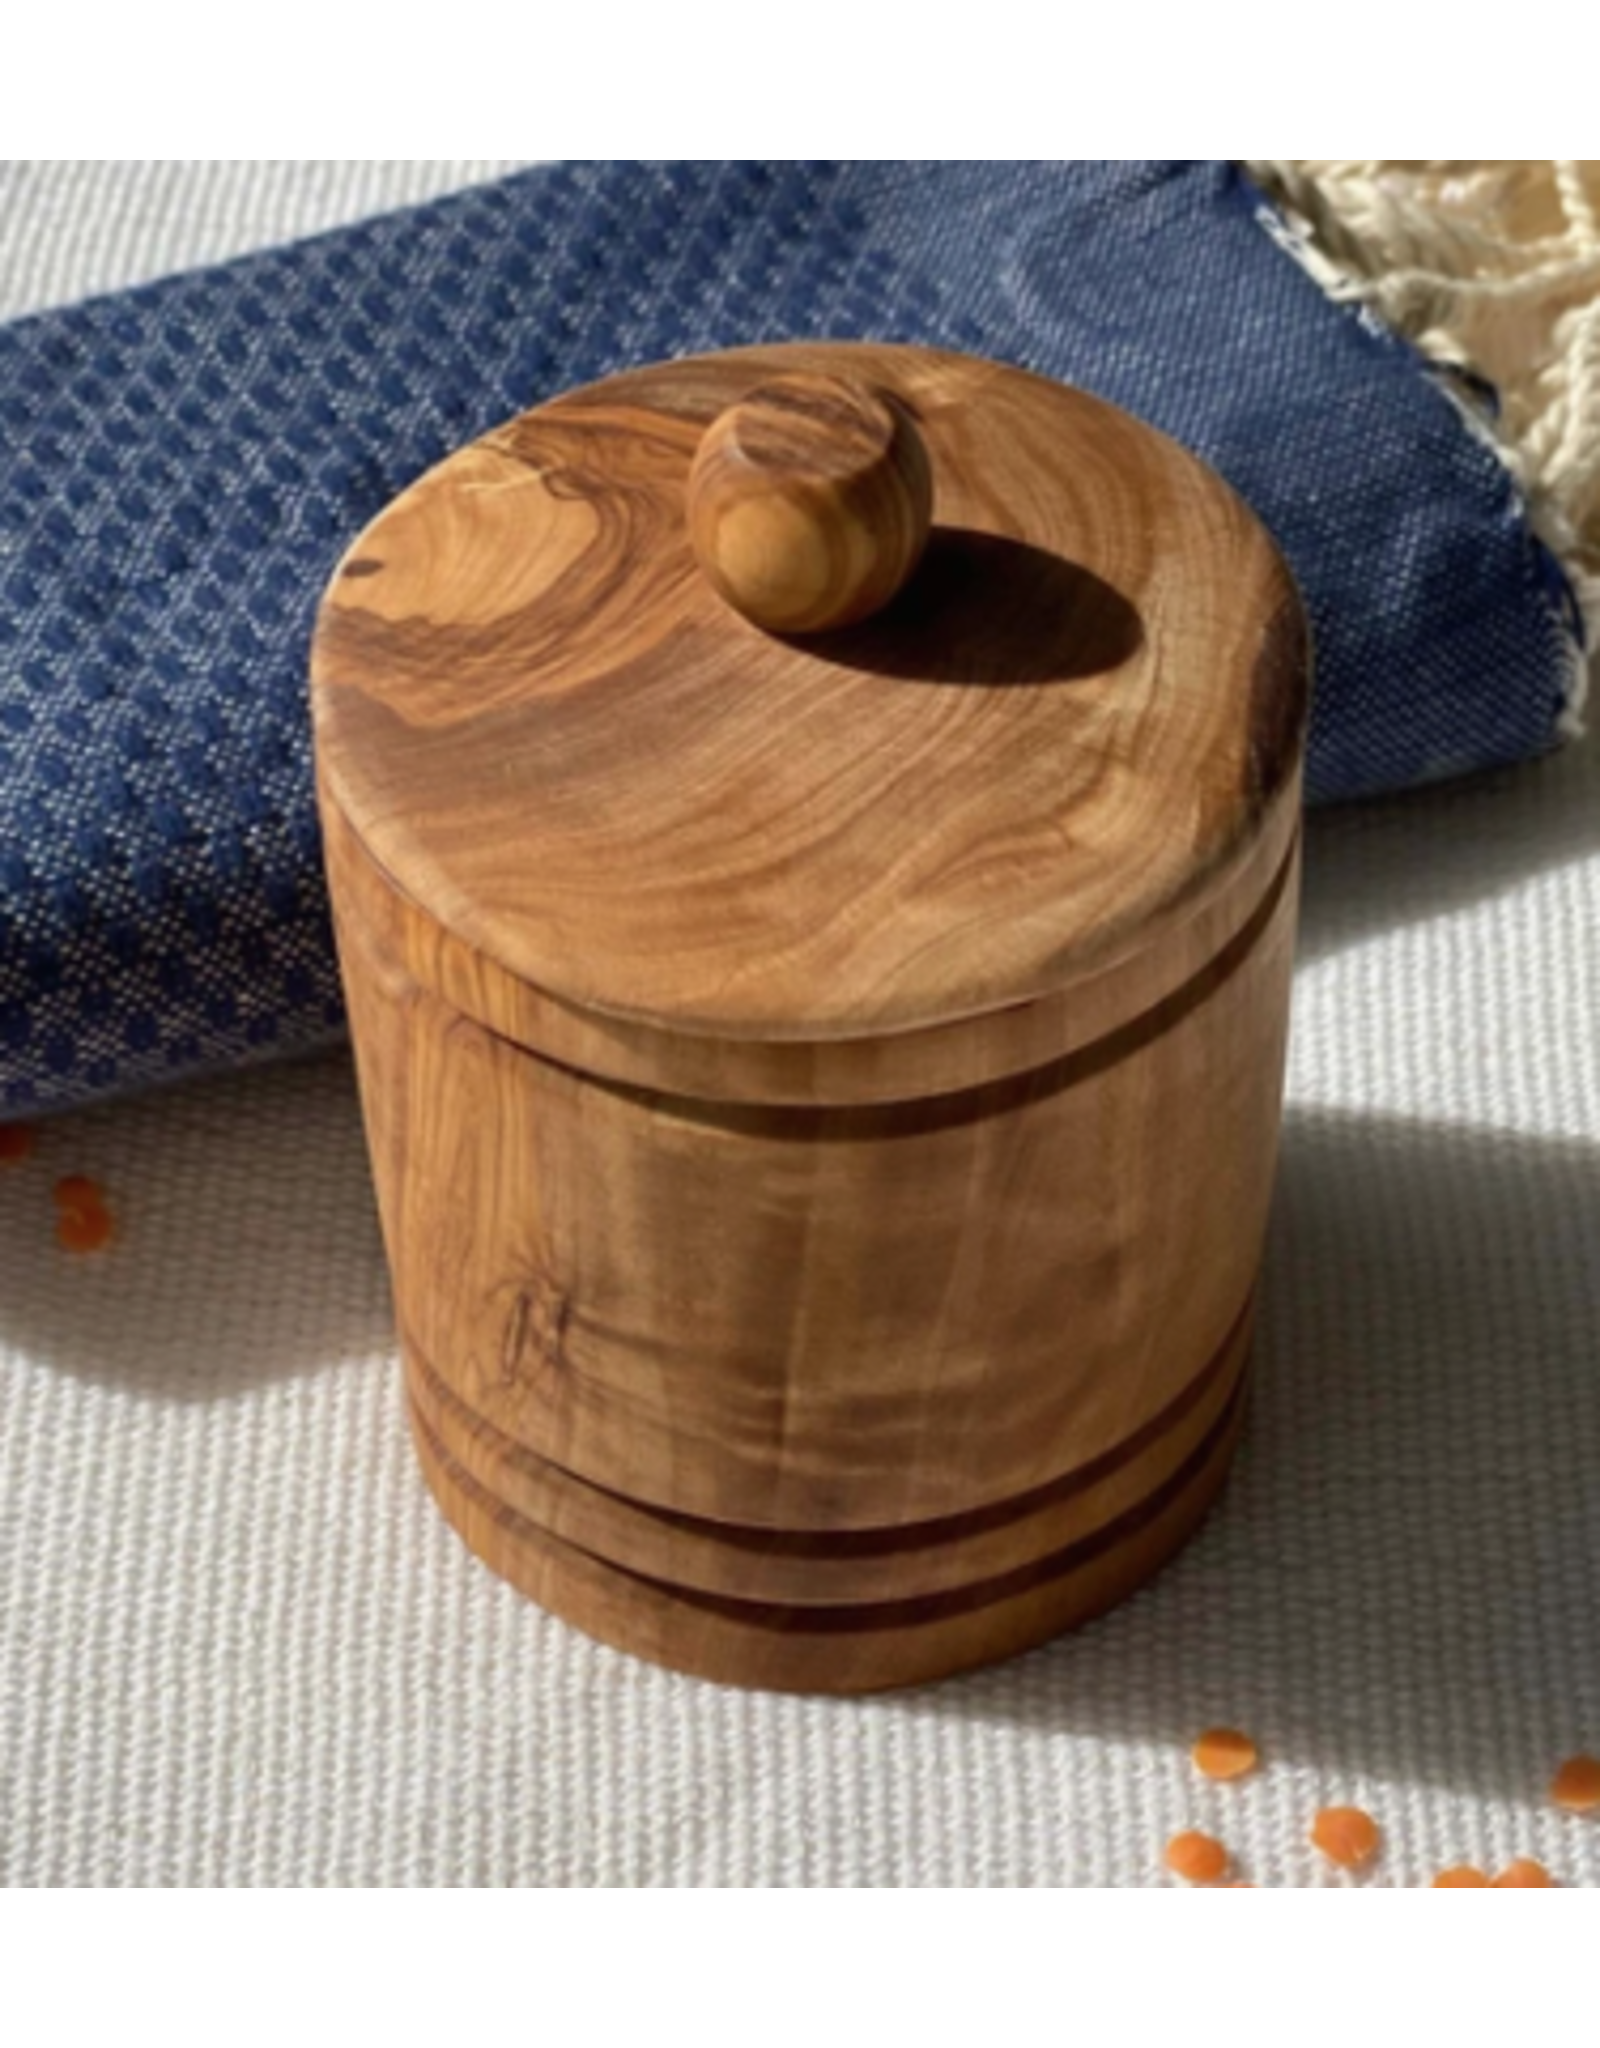 Olive Wood Spice Jar with Lid